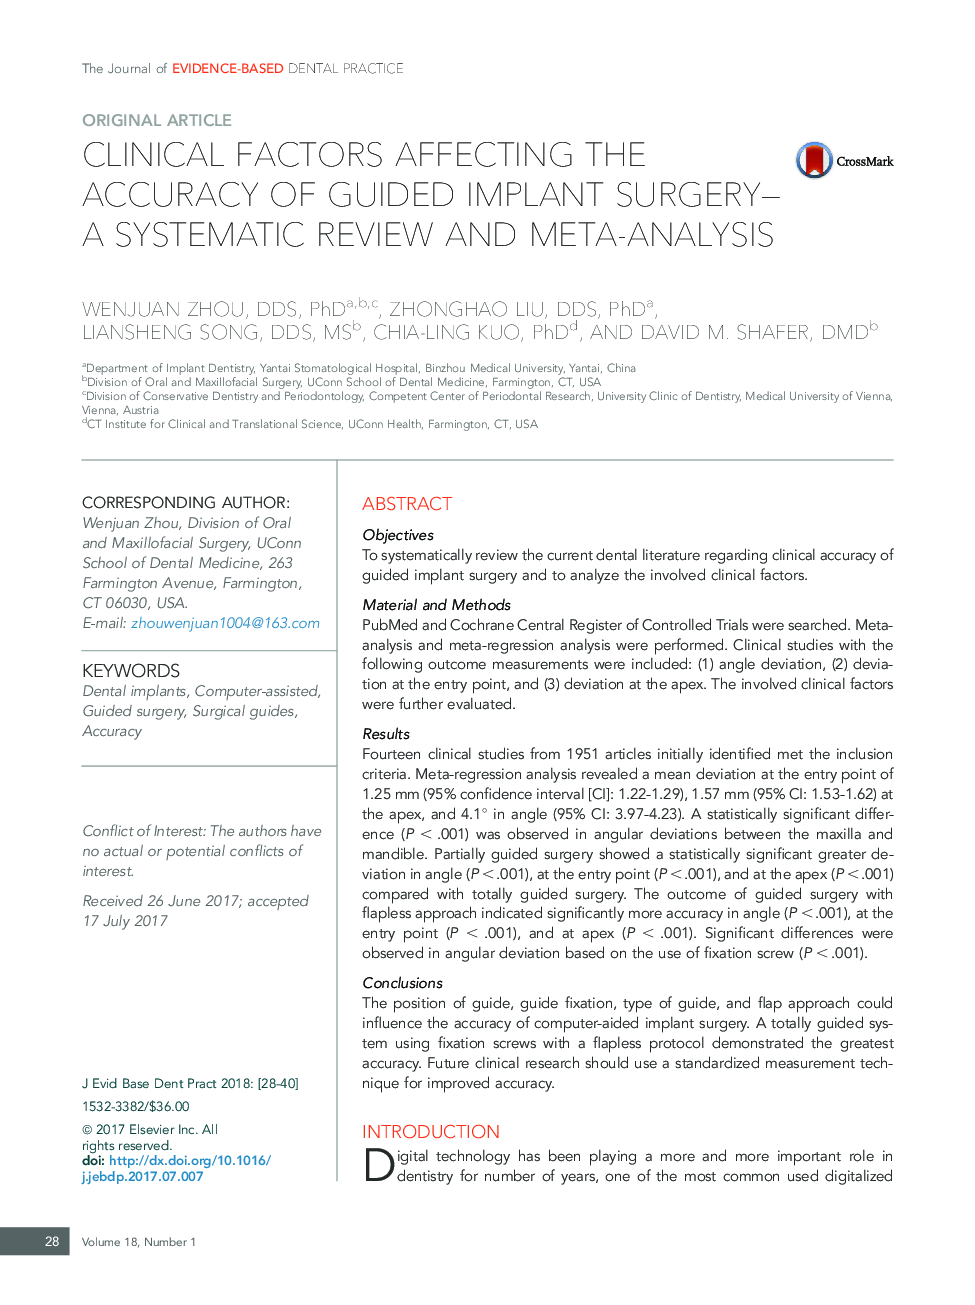 Clinical Factors Affecting the Accuracy of Guided Implant Surgery-A Systematic Review and Meta-analysis